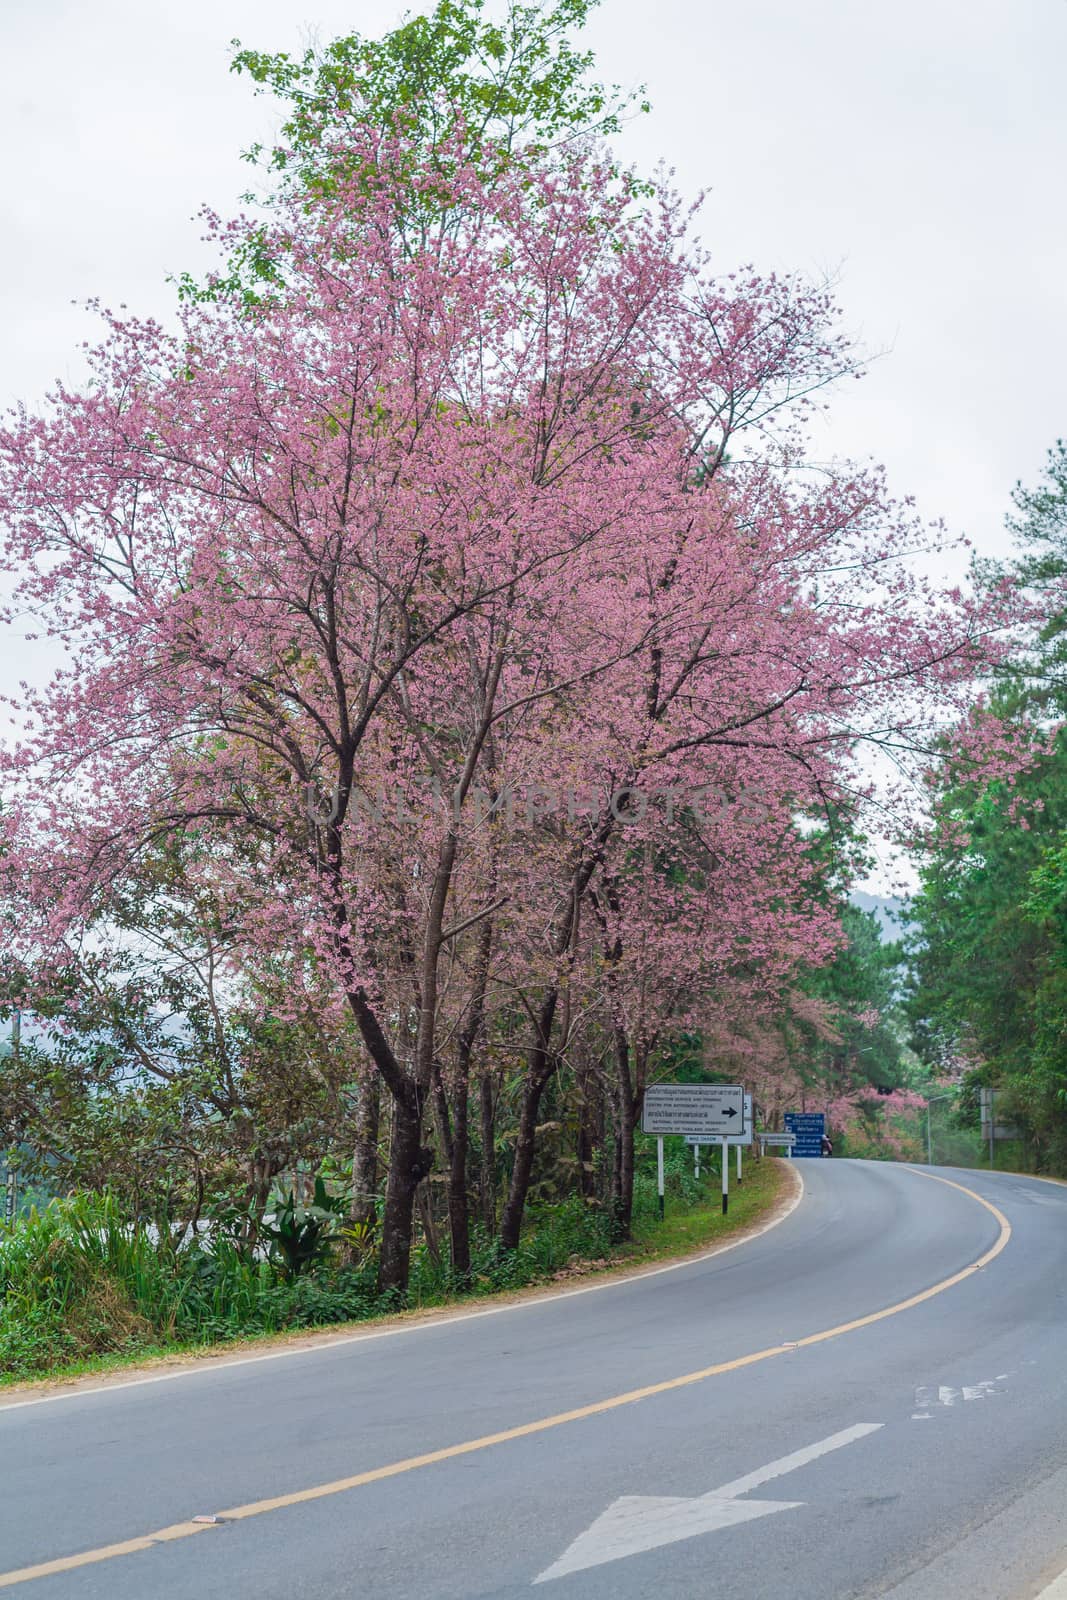 Wild himalayan cherry on romantic road  by themorningglory